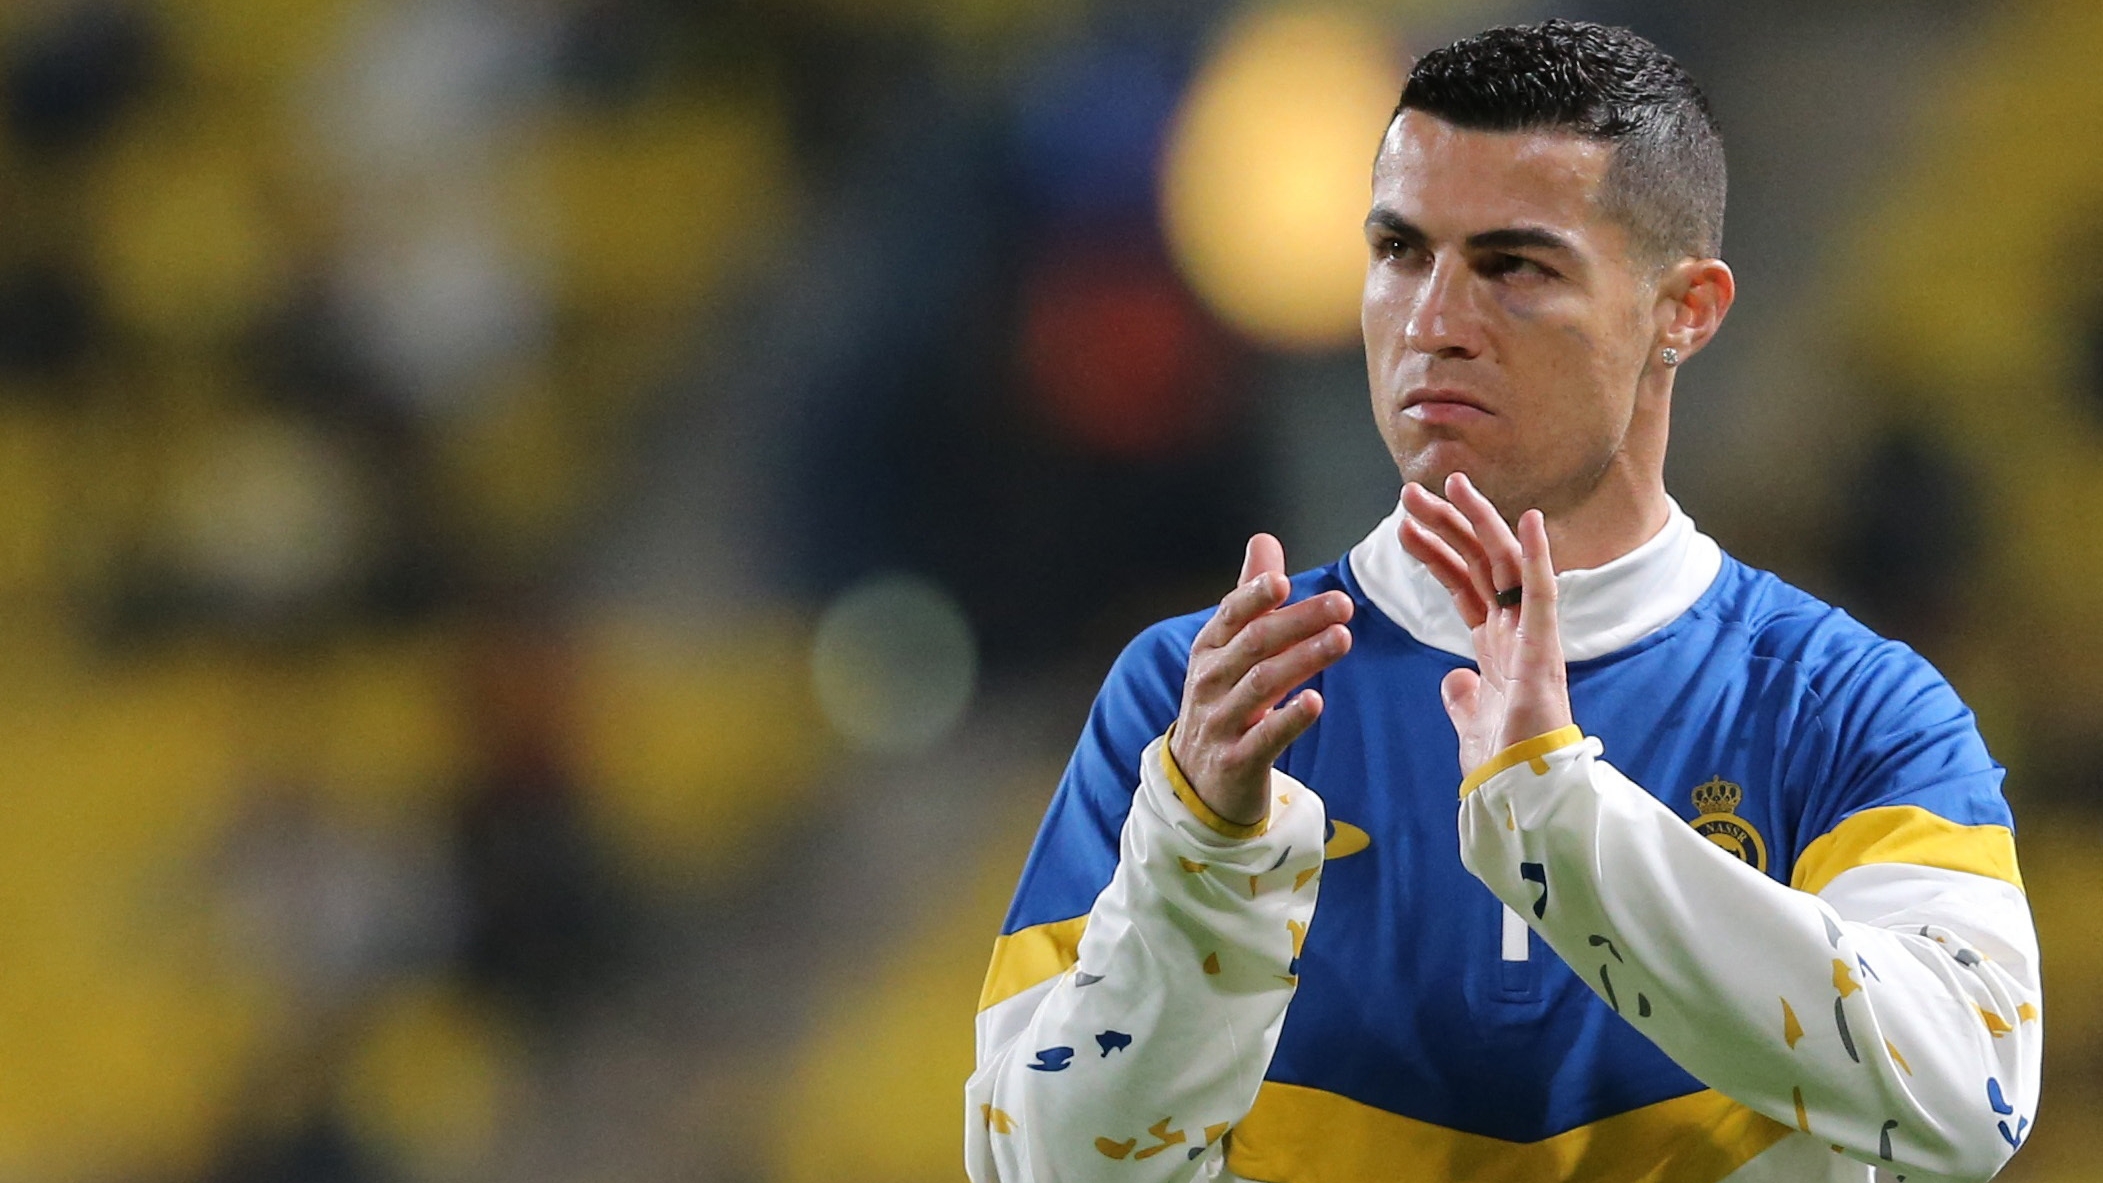 Cristiano Ronaldo agreed on his departure from Manchester United, tried to fight with his agent, and joined Al-Nassr